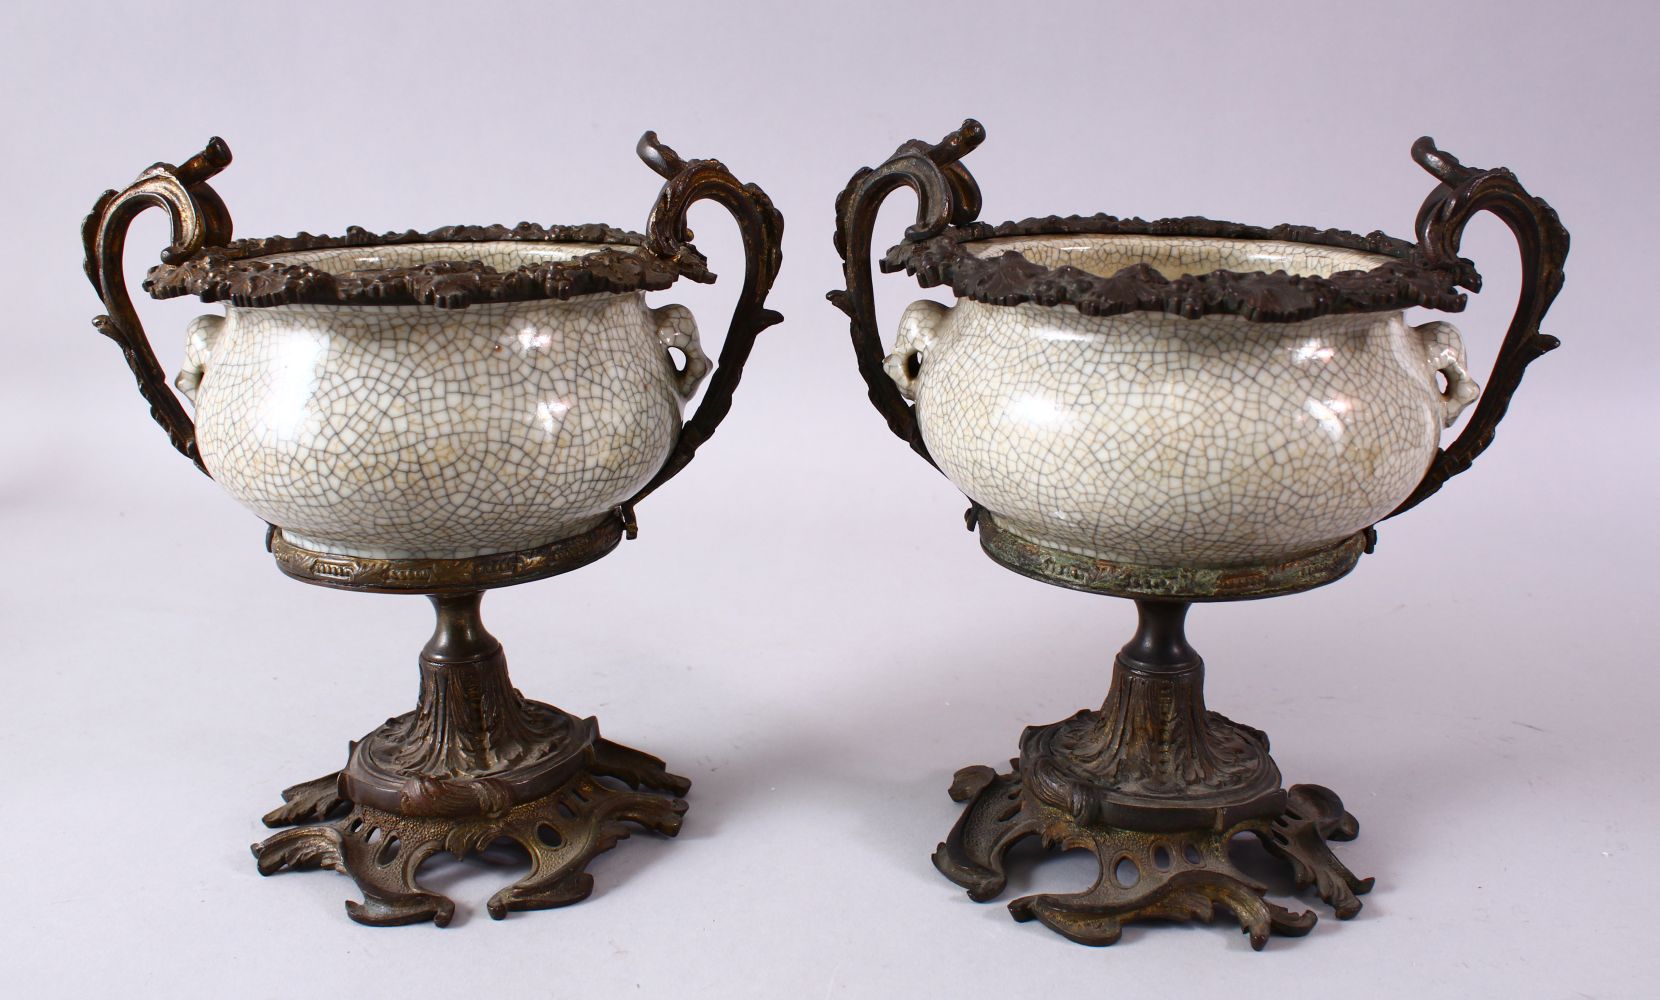 A PAIR OF 19TH/20TH CENTURY CHINESE GUAN WARE POTTERY BOWLS with ormolu mounts, the bowls with